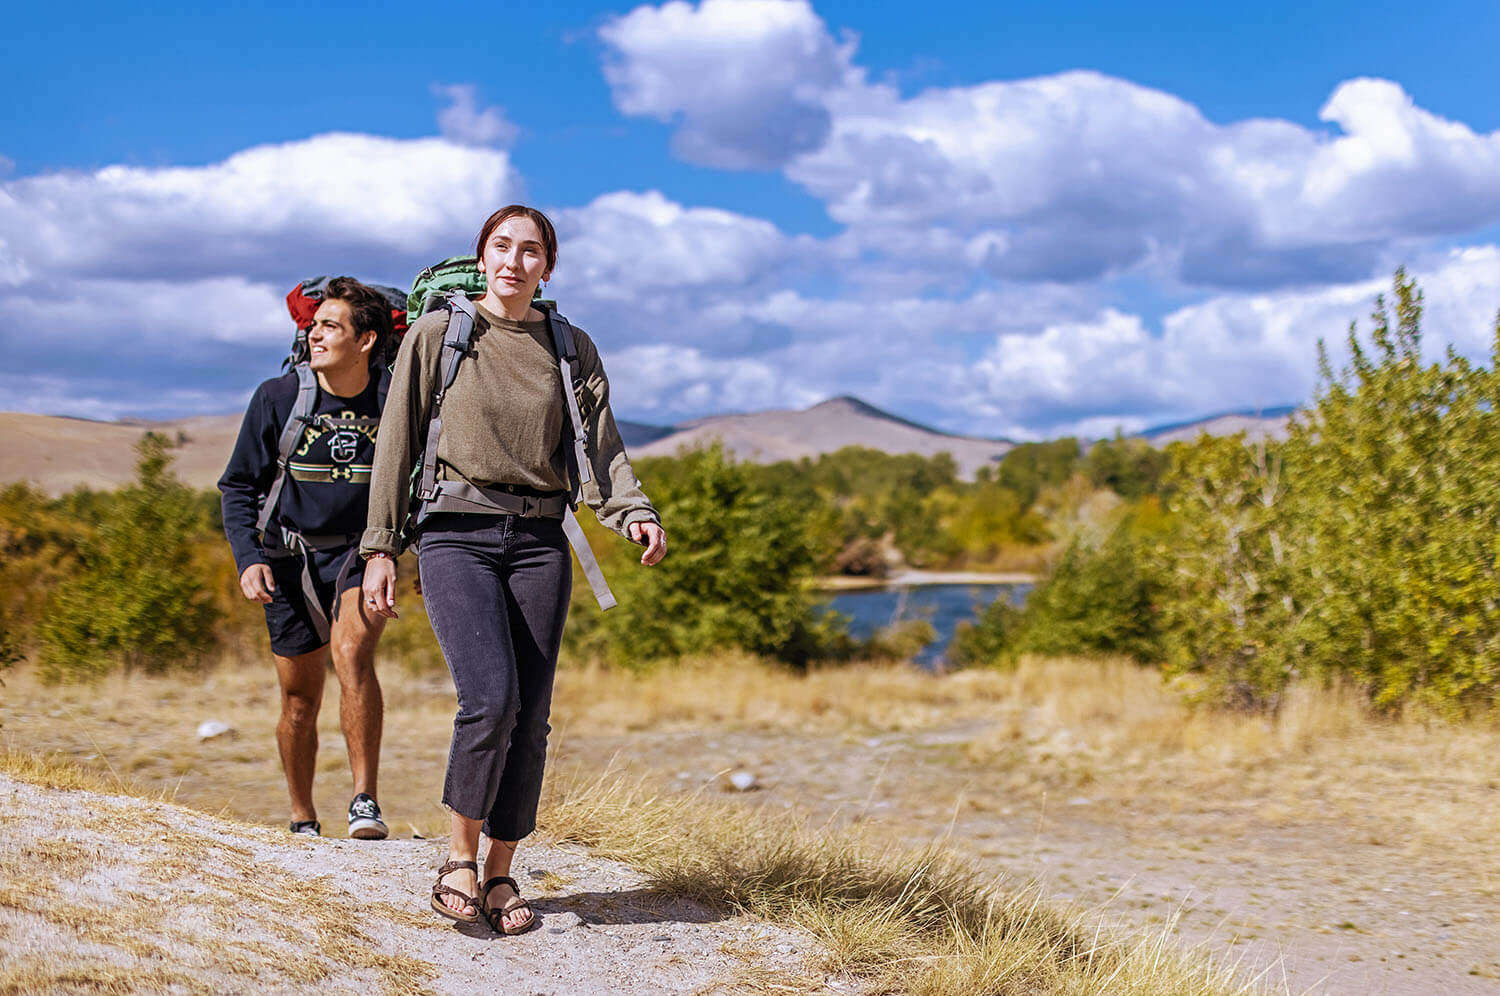 Two students on a dirt trail while wearing hiking backpacks and large mountains in the distance